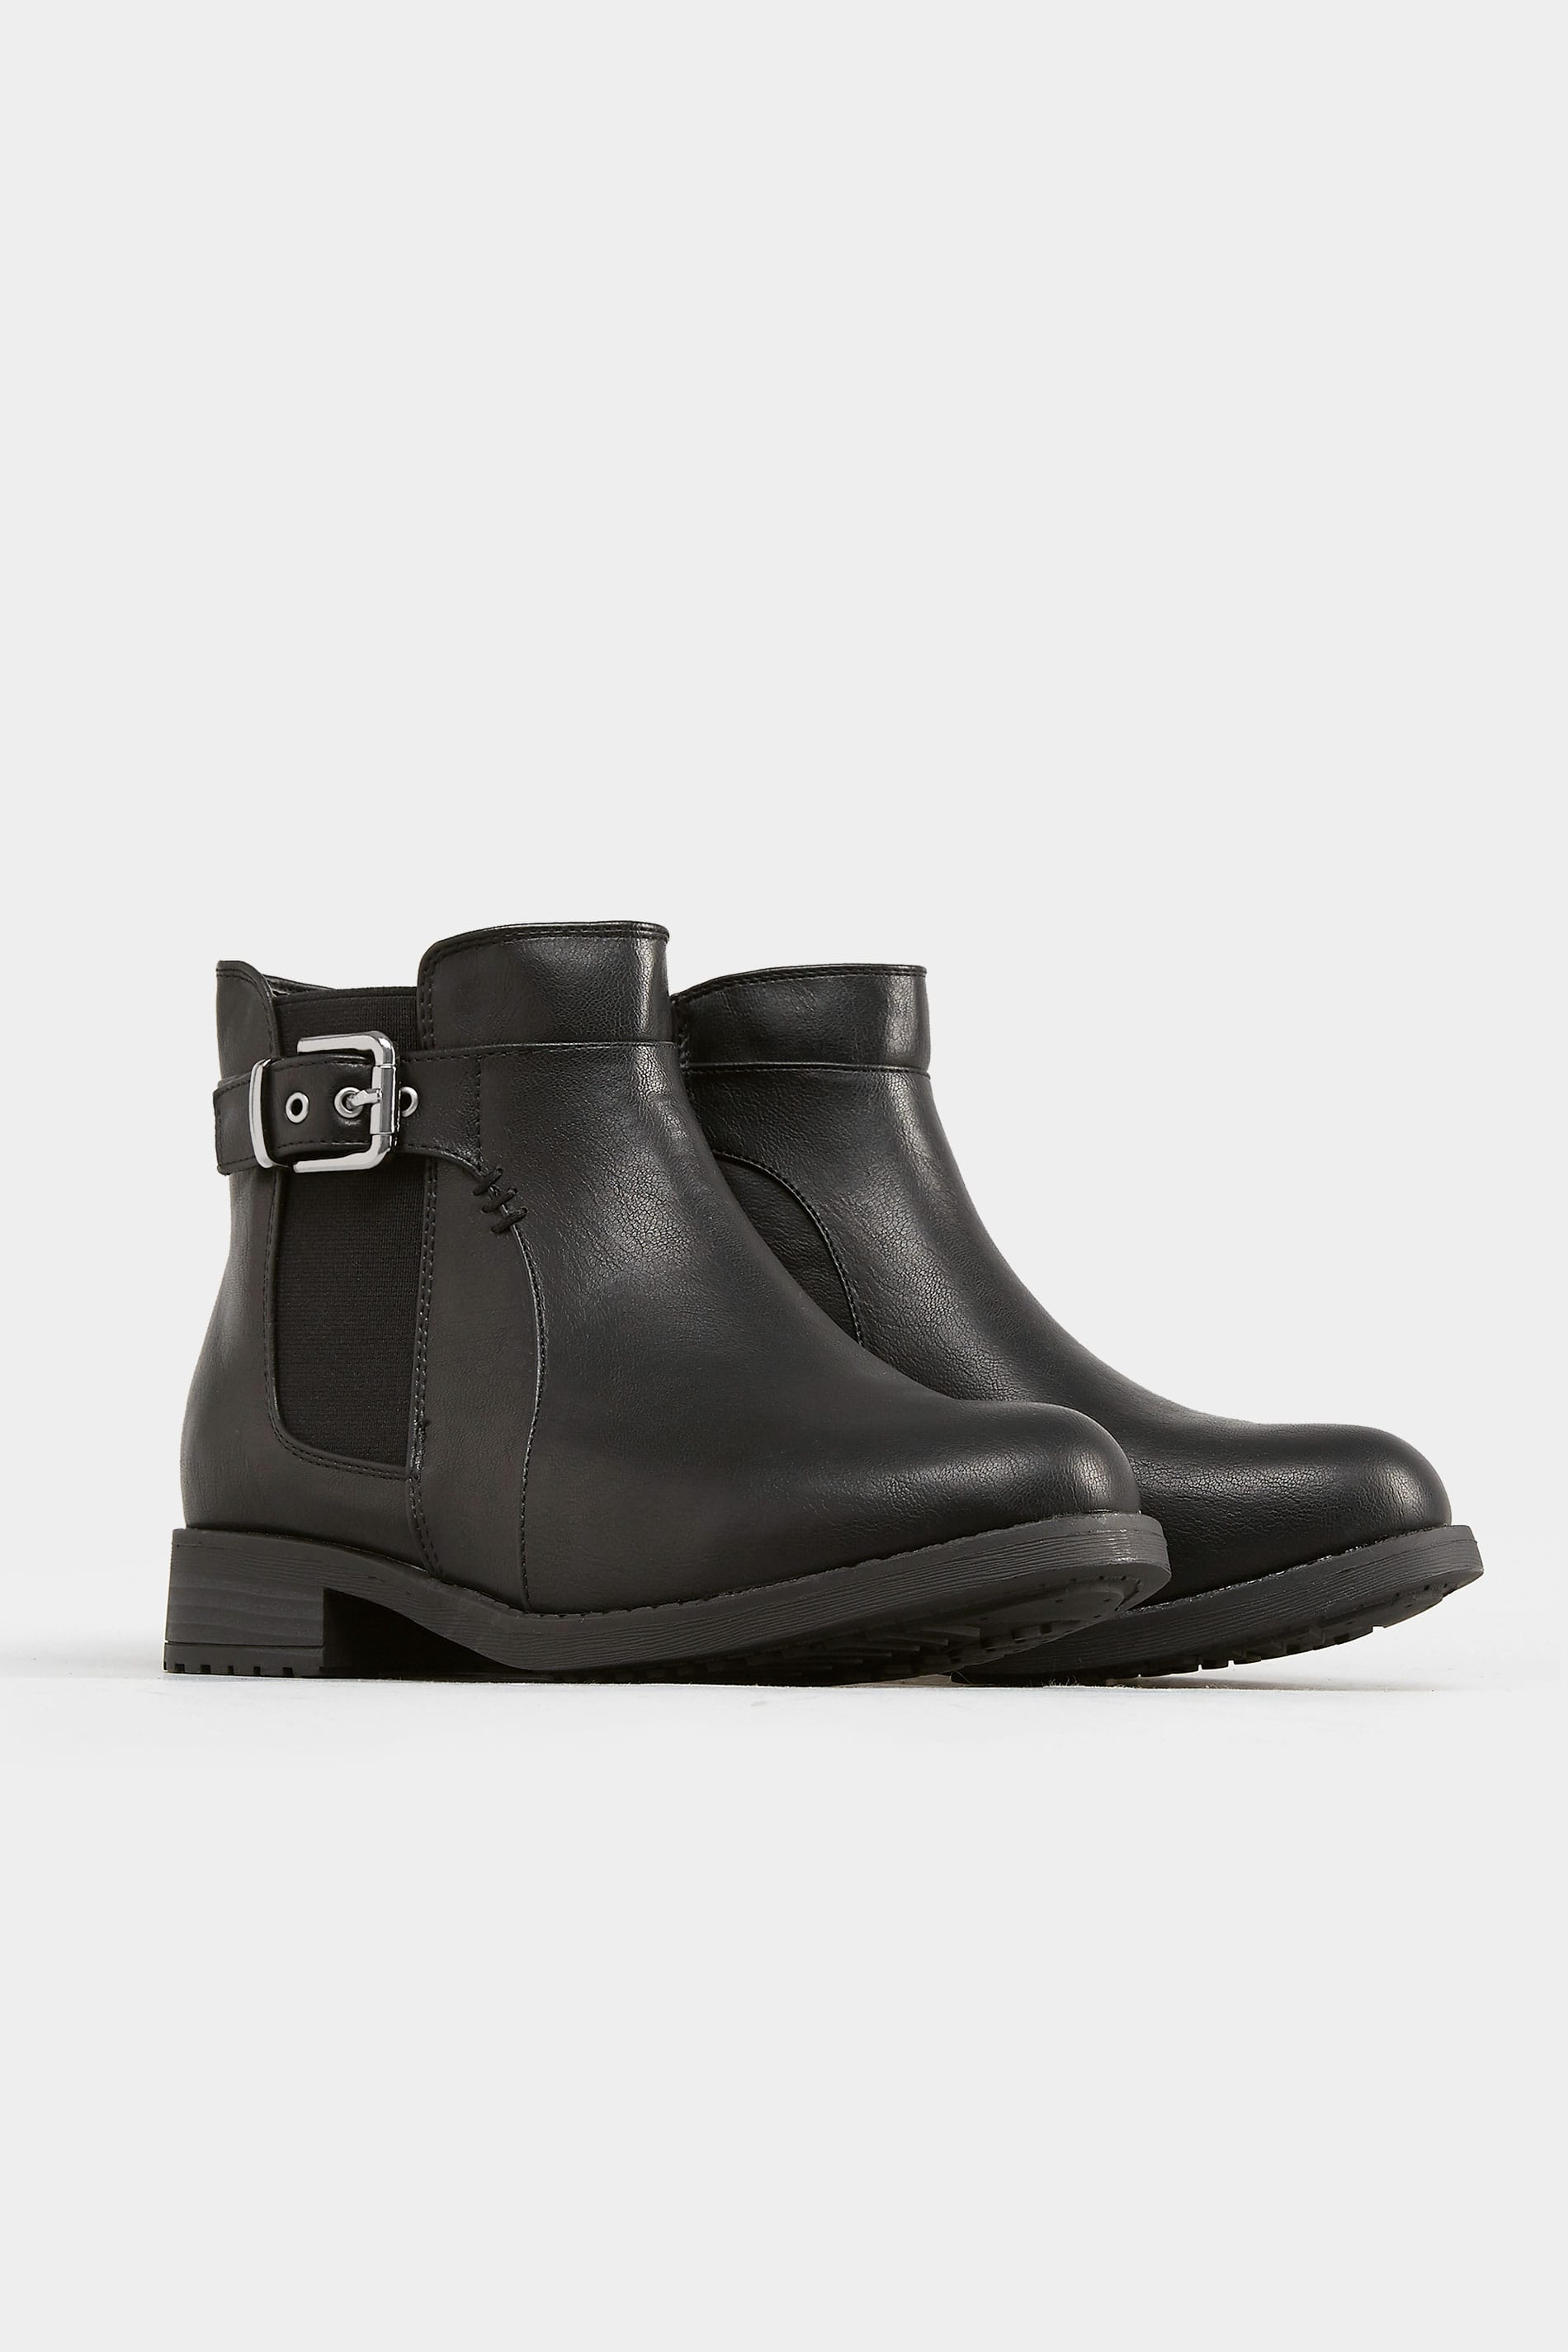 Black Chelsea Ankle Boot In EEE Fit, Sizes 4EEE to 10EEE | Yours Clothing